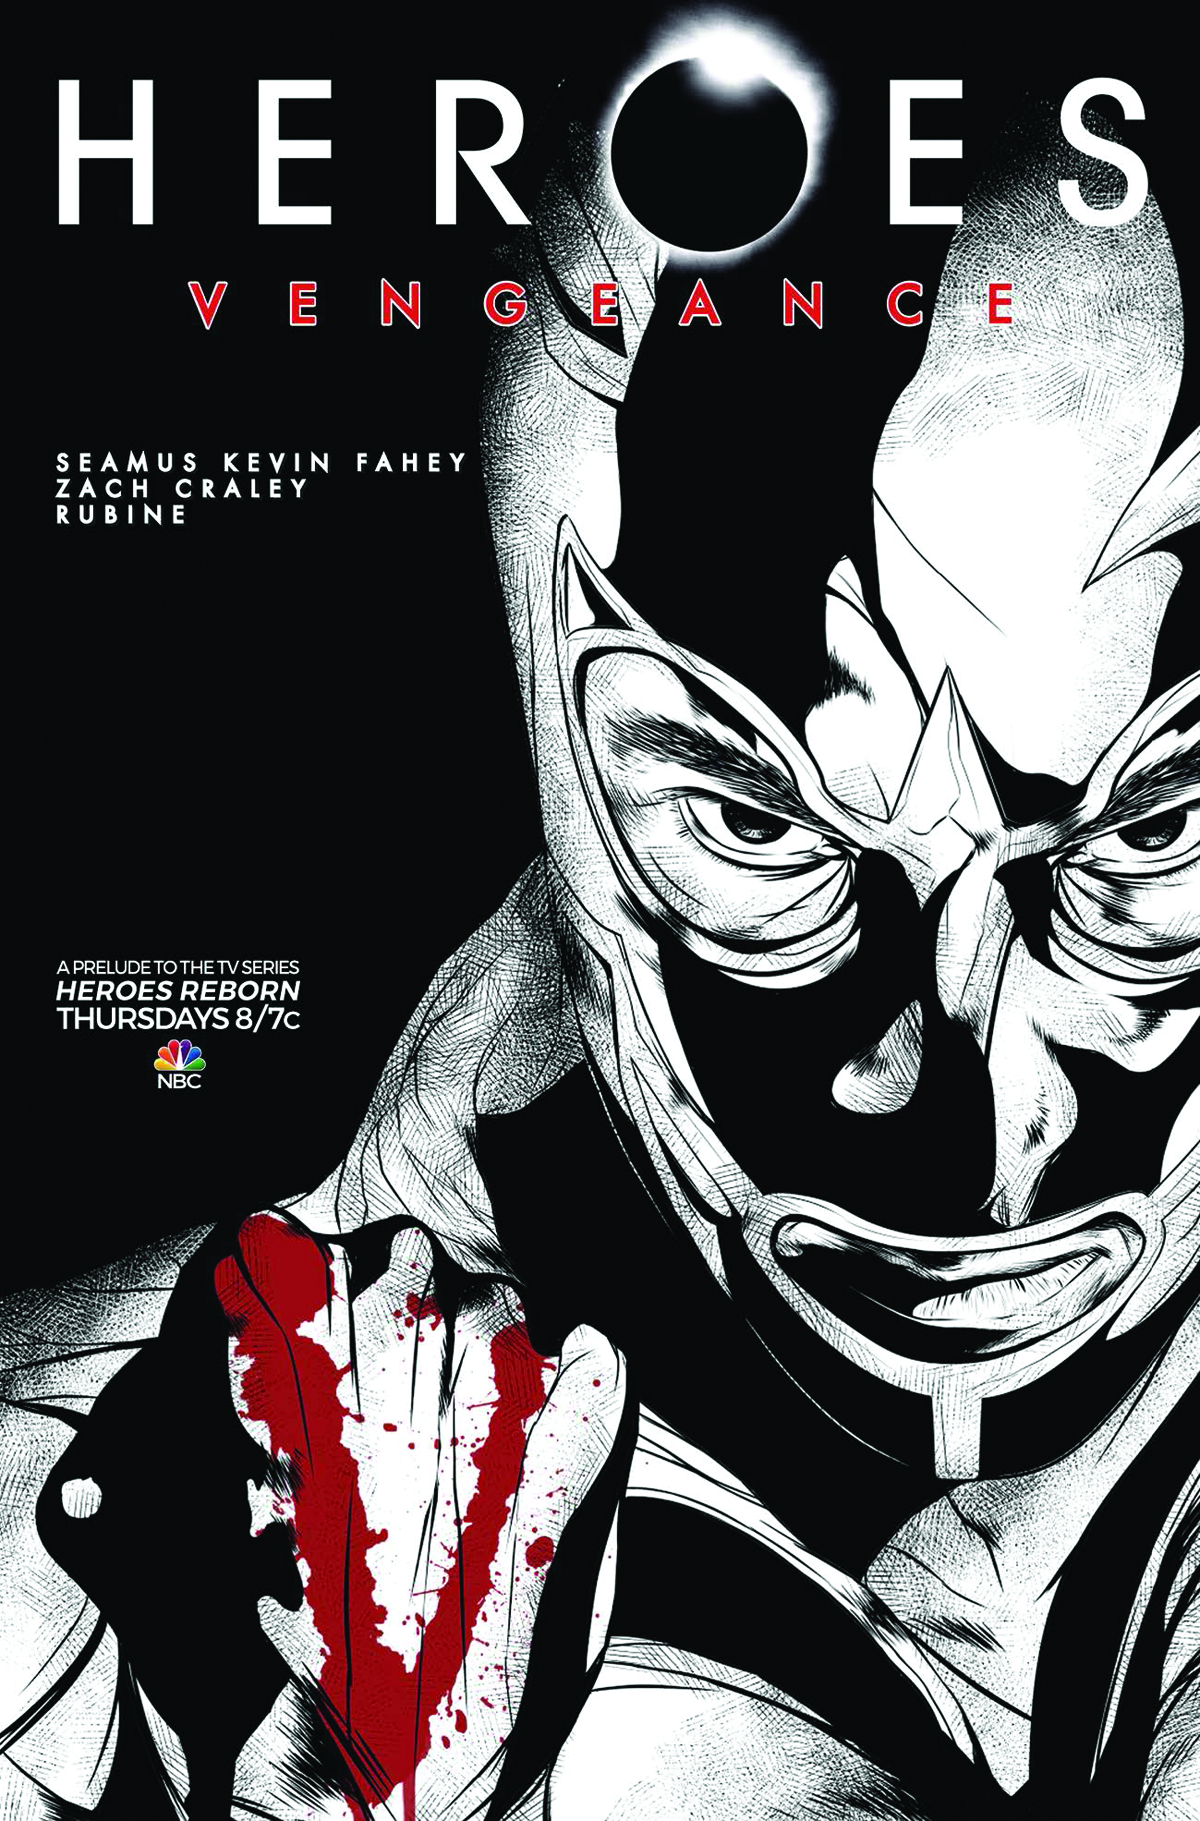 HEROES VENGEANCE #2 (OF 5) SUBSCRIPTION